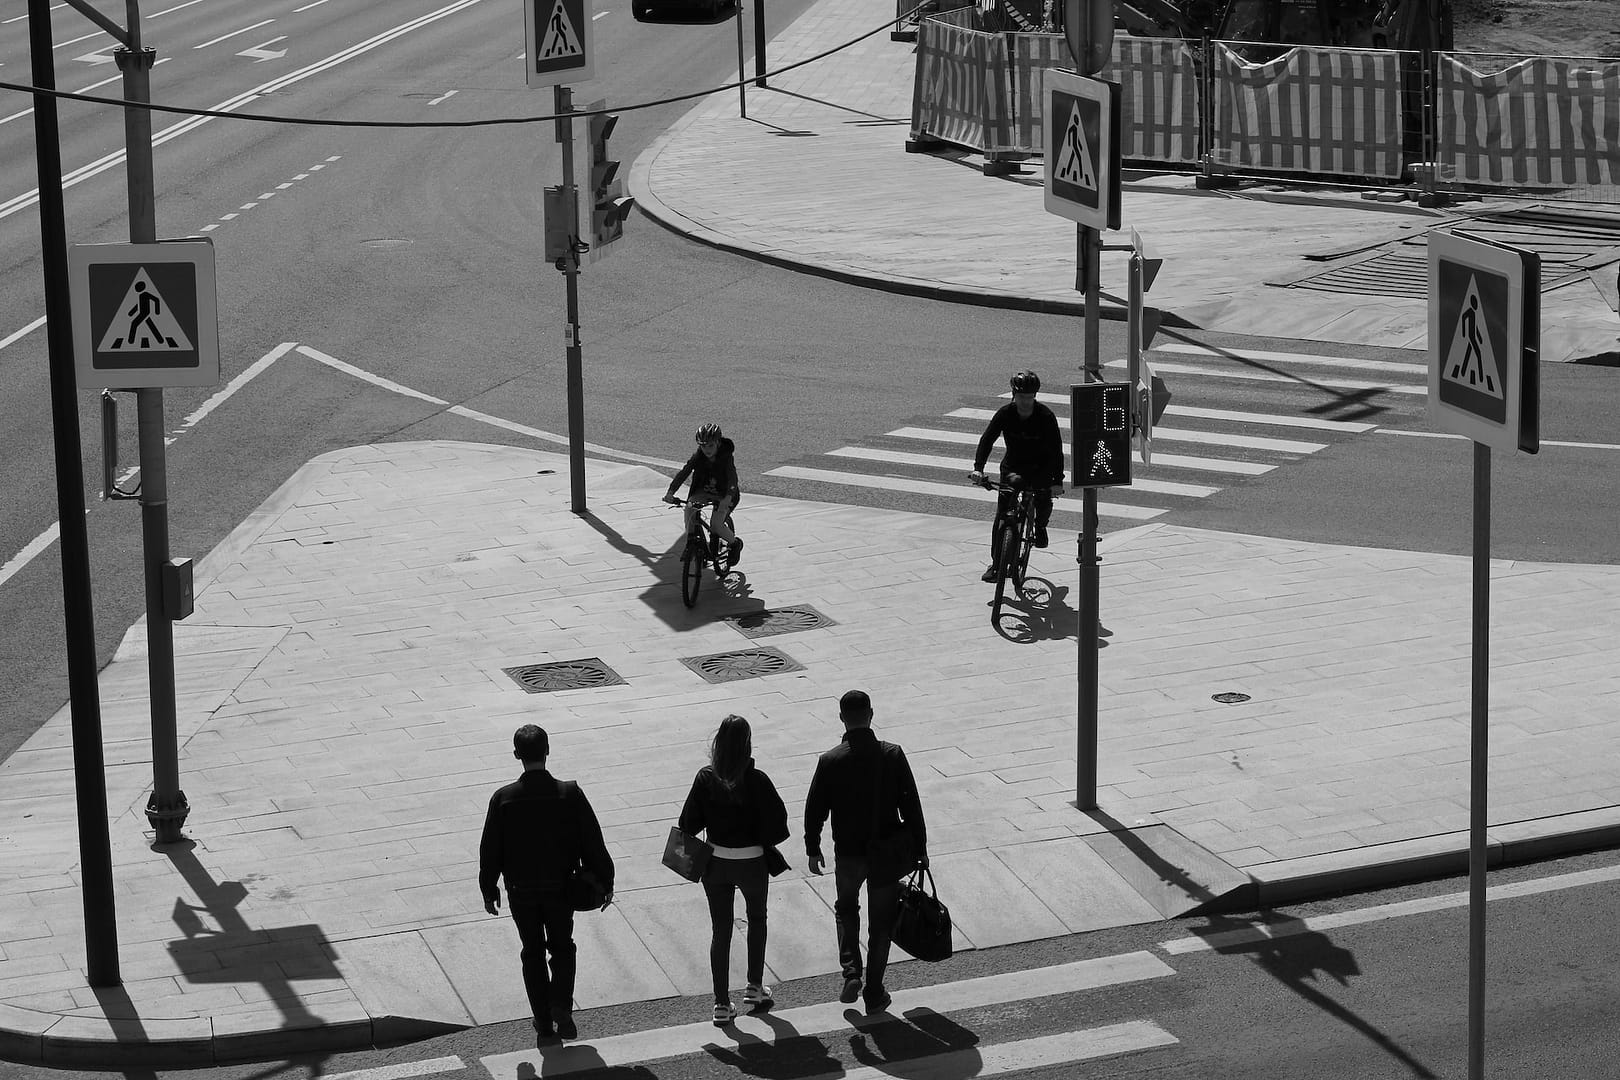 cyclists and pedestrians crossing a road